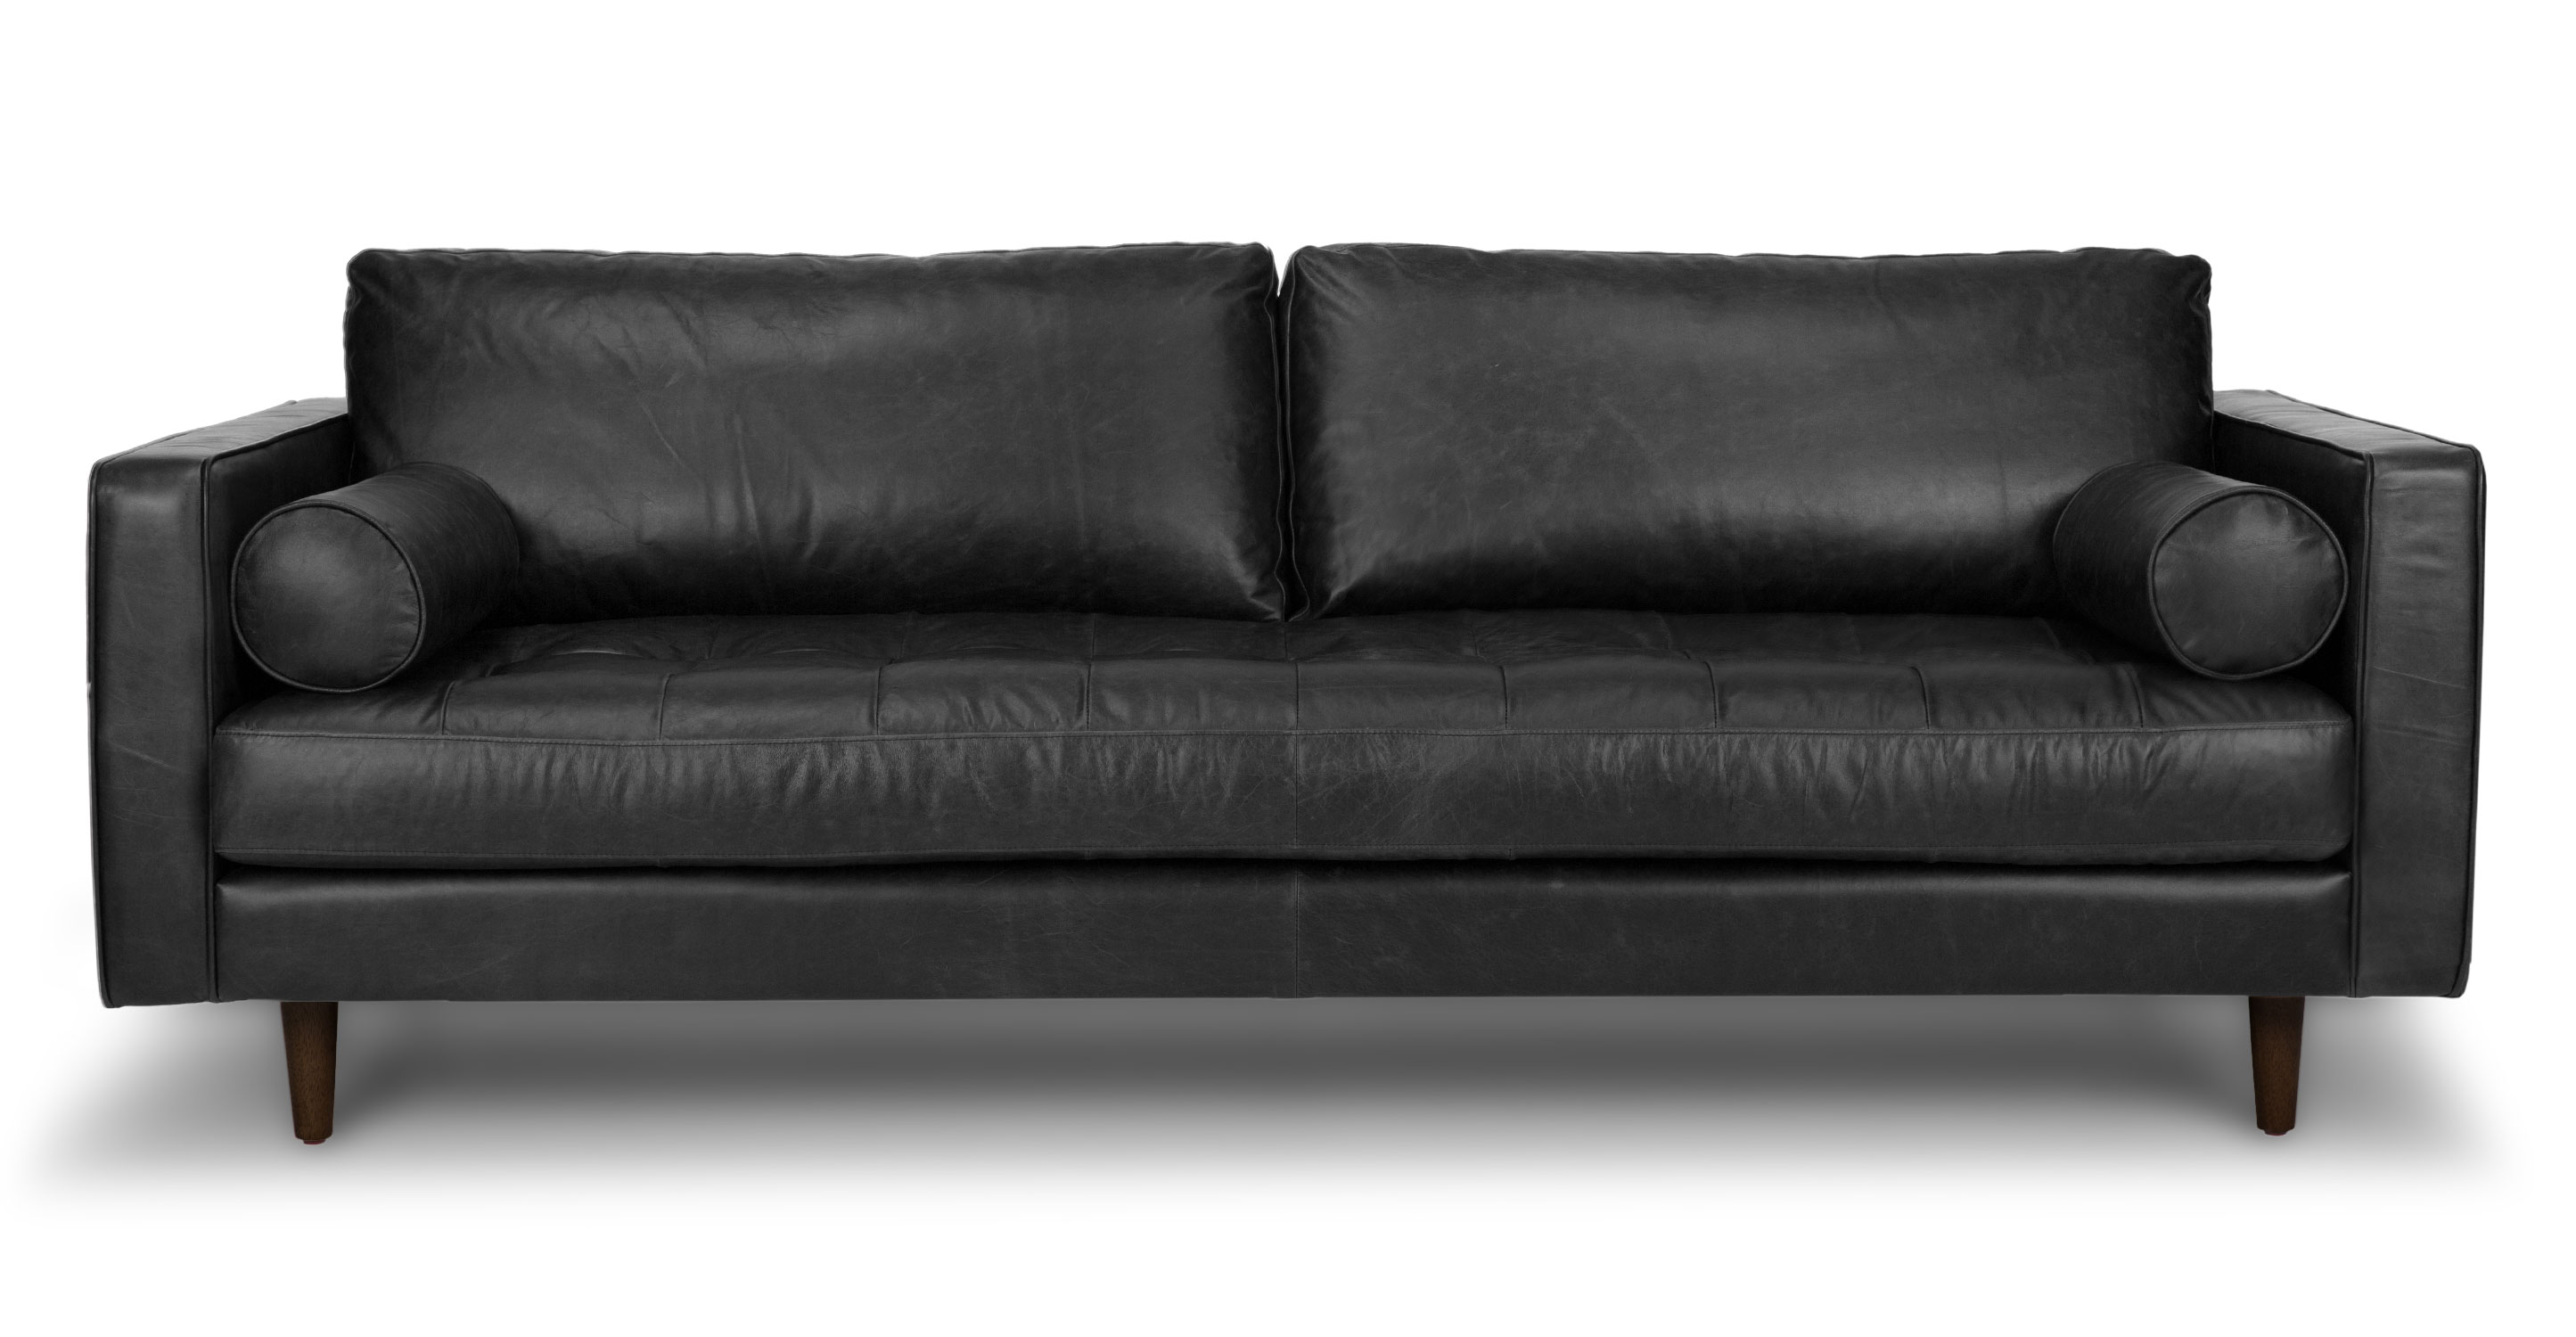 Black couch living room ideas: striking
  seating ideas